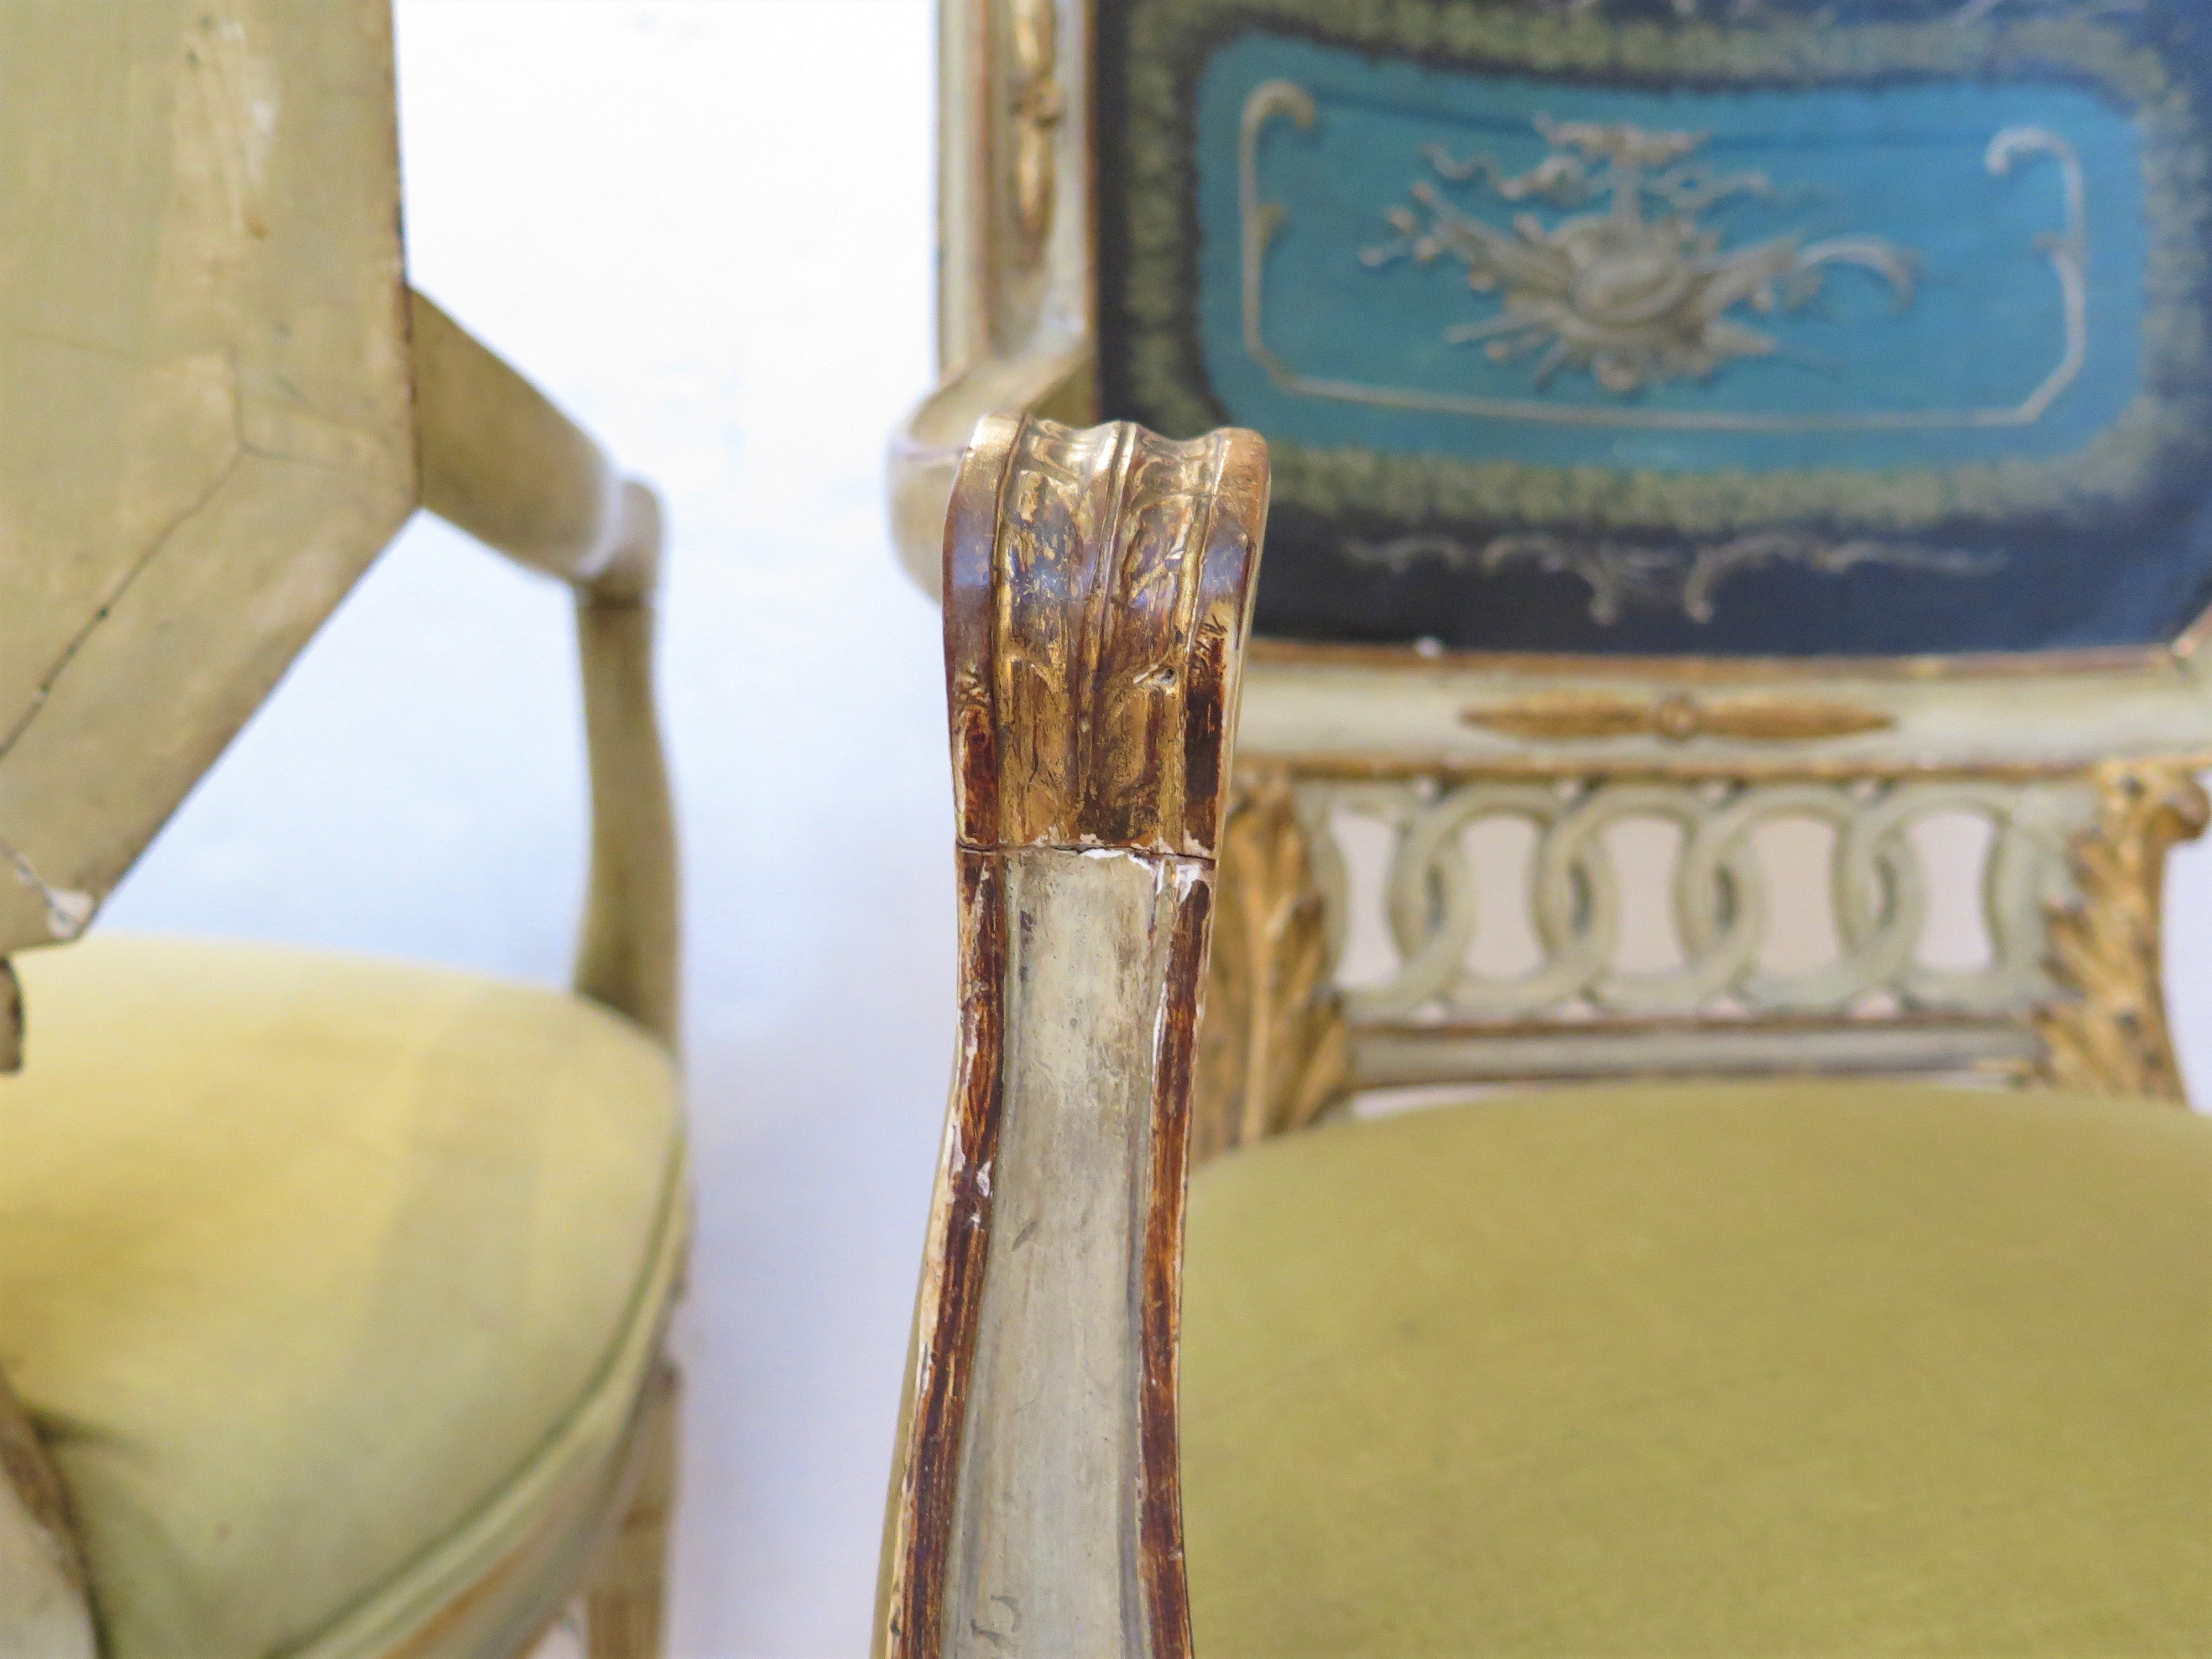 Pair of Paint and Parcel Gilt Italian Neoclassical Armchairs